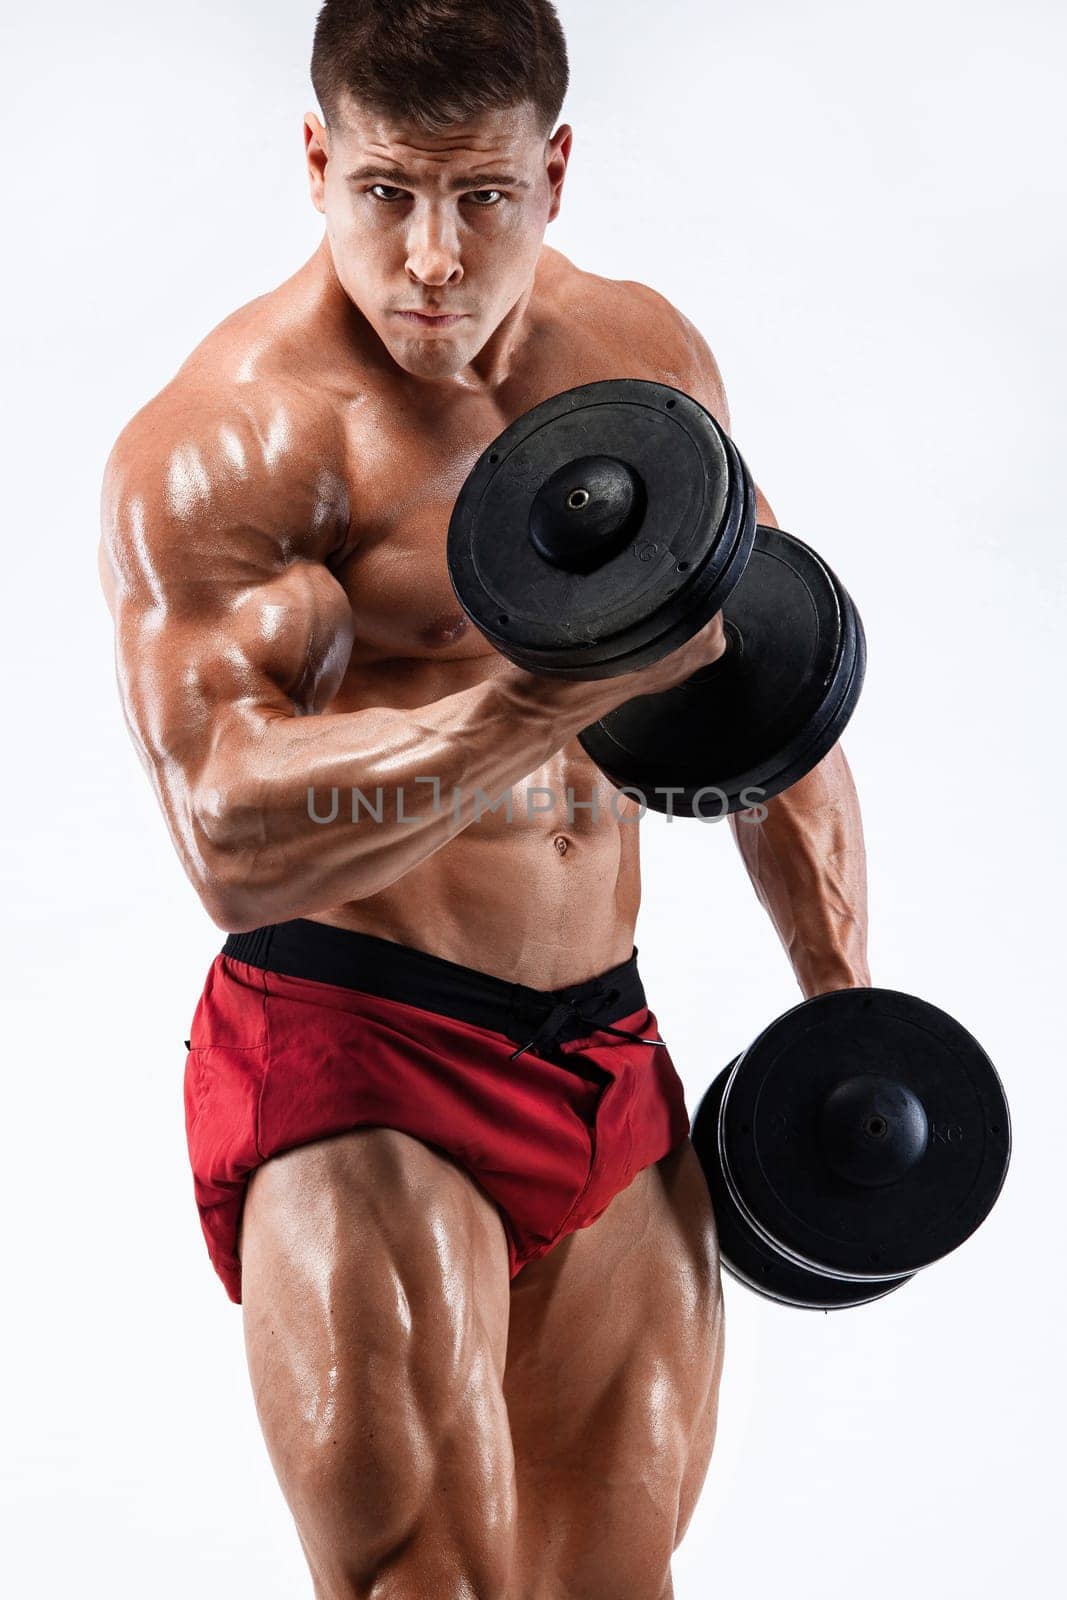 Brutal strong muscular bodybuilder athletic man pumping up muscles with dumbbell on white background. Workout bodybuilding concept. Copy space for sport nutrition ads. by MikeOrlov